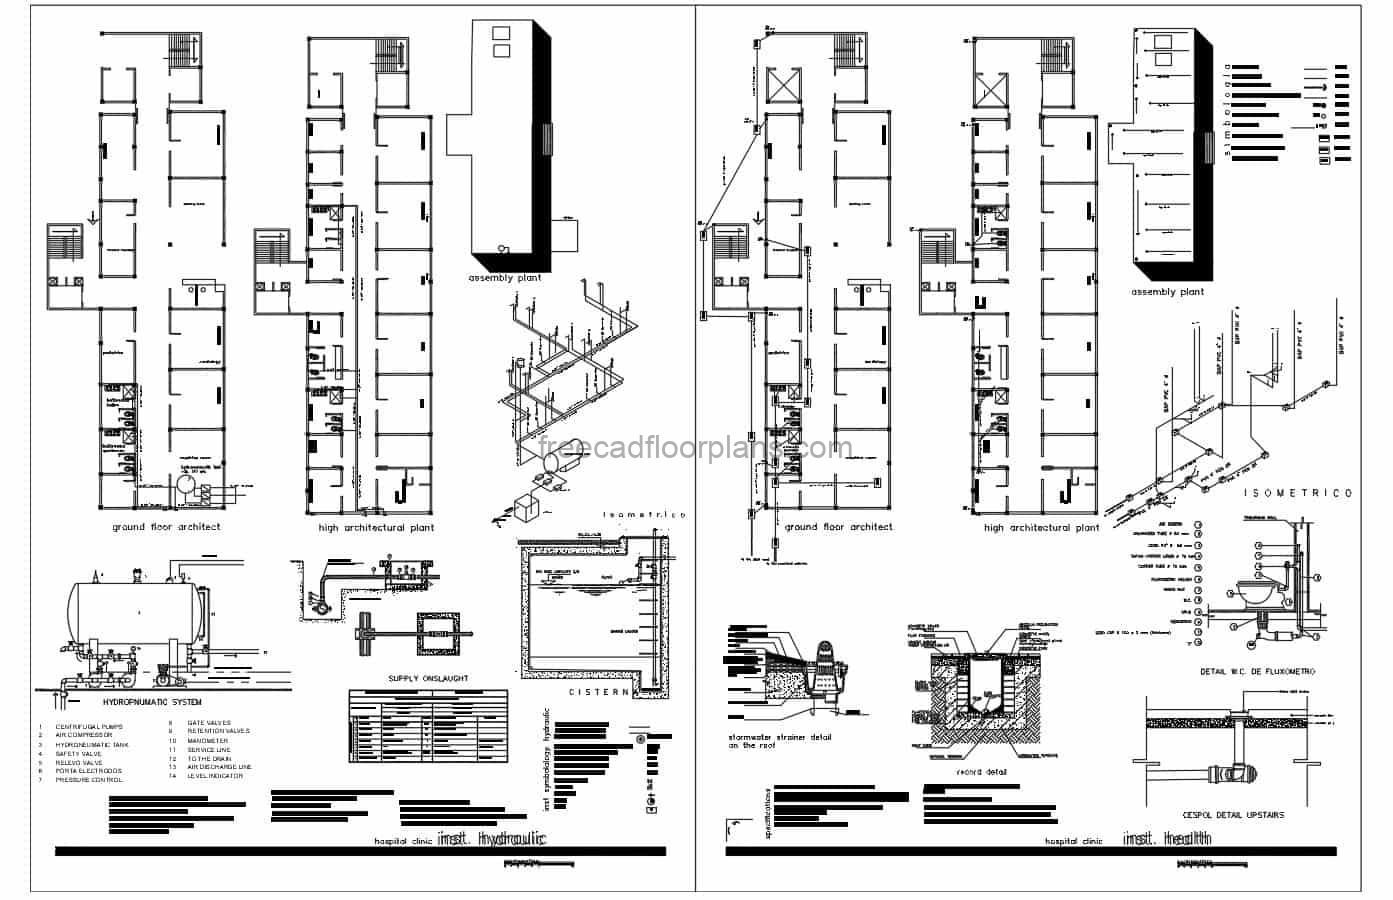 Complete architectural design of a two level health center with surgery, cardiology, pediatrics and other health center spaces. The complete project includes sanitary isometrics, foundation details, water supply plans, electrical and structural plans, technical details, emergency exits plan in the clinic. Free AutoCAD drawings for download in DWG format.